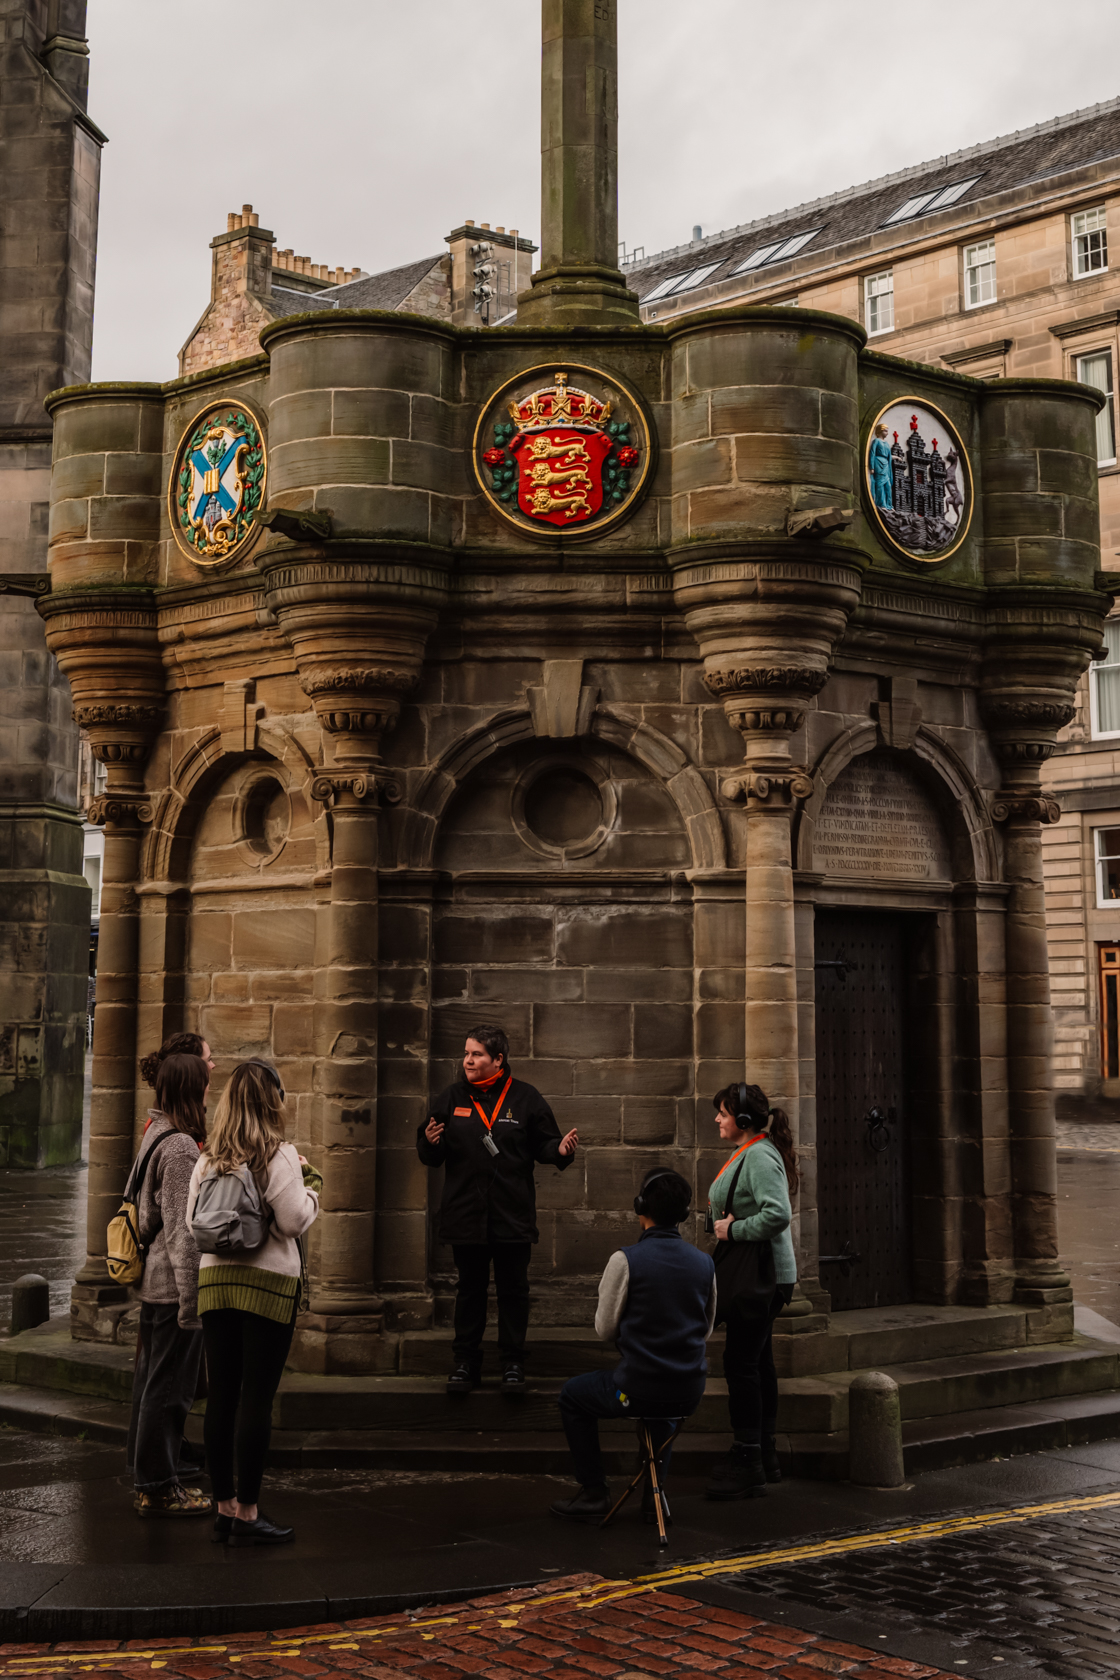 A Mercat Storyteller in a black jacket stands at the Mercat Cross with a group of engaged visitors.